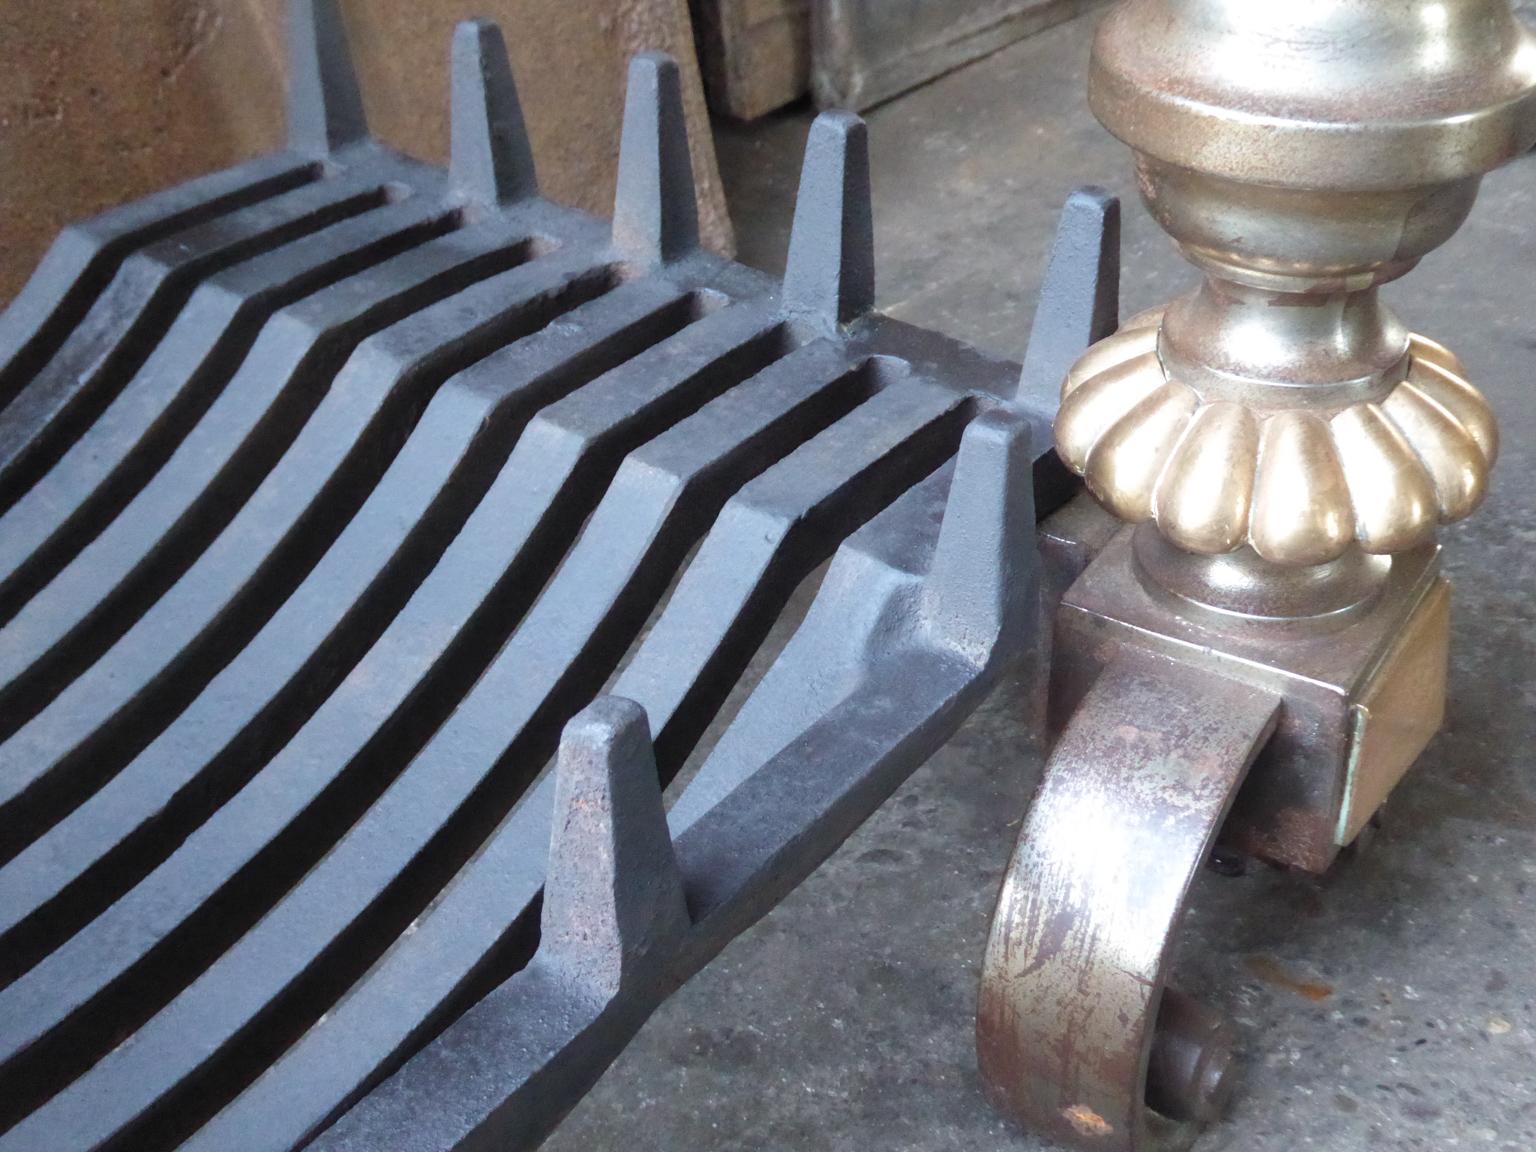 English Victorian Style Fireplace Grate, Fire Grate 3